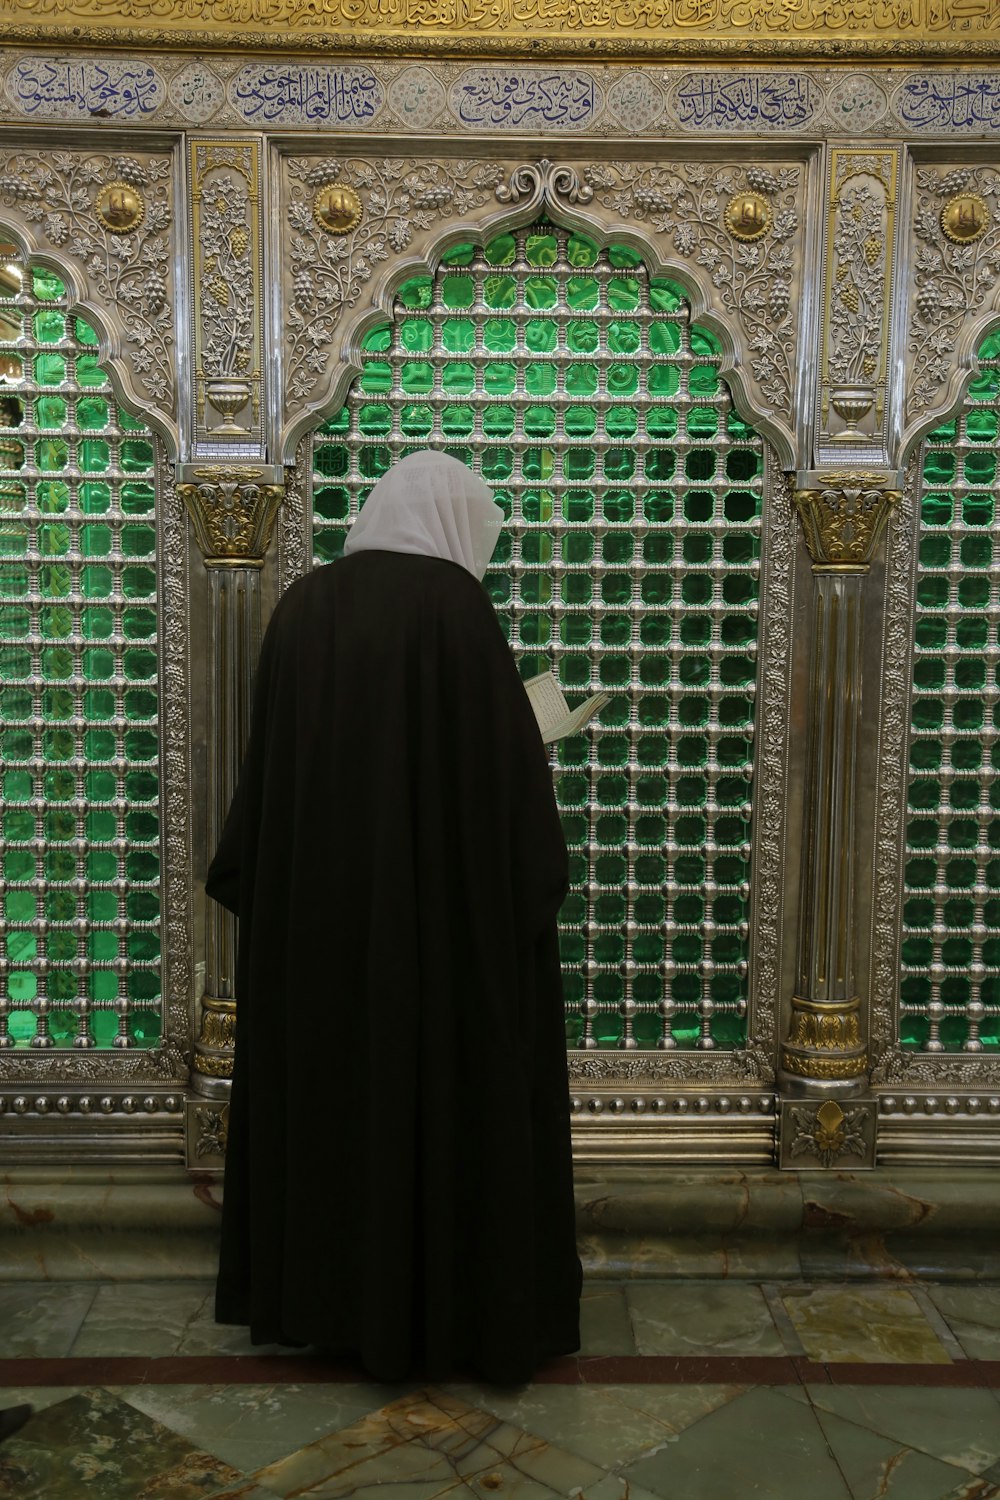 a person standing in front of a green glass wall